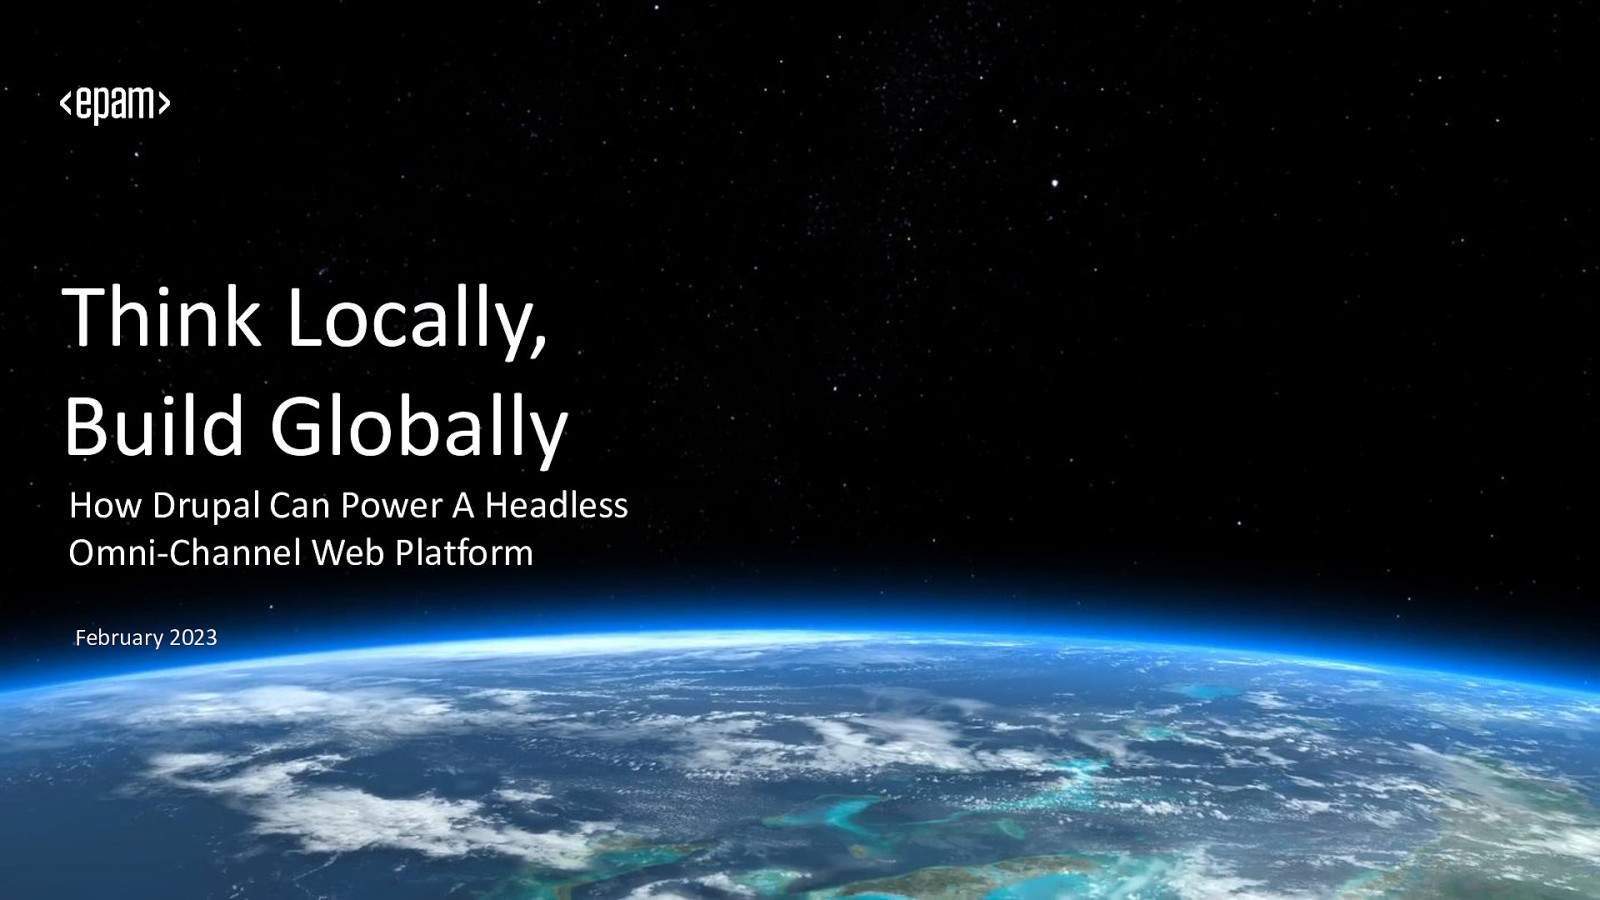 Think Locally, Build Globally - How Drupal is powering headless omni-channel web platforms